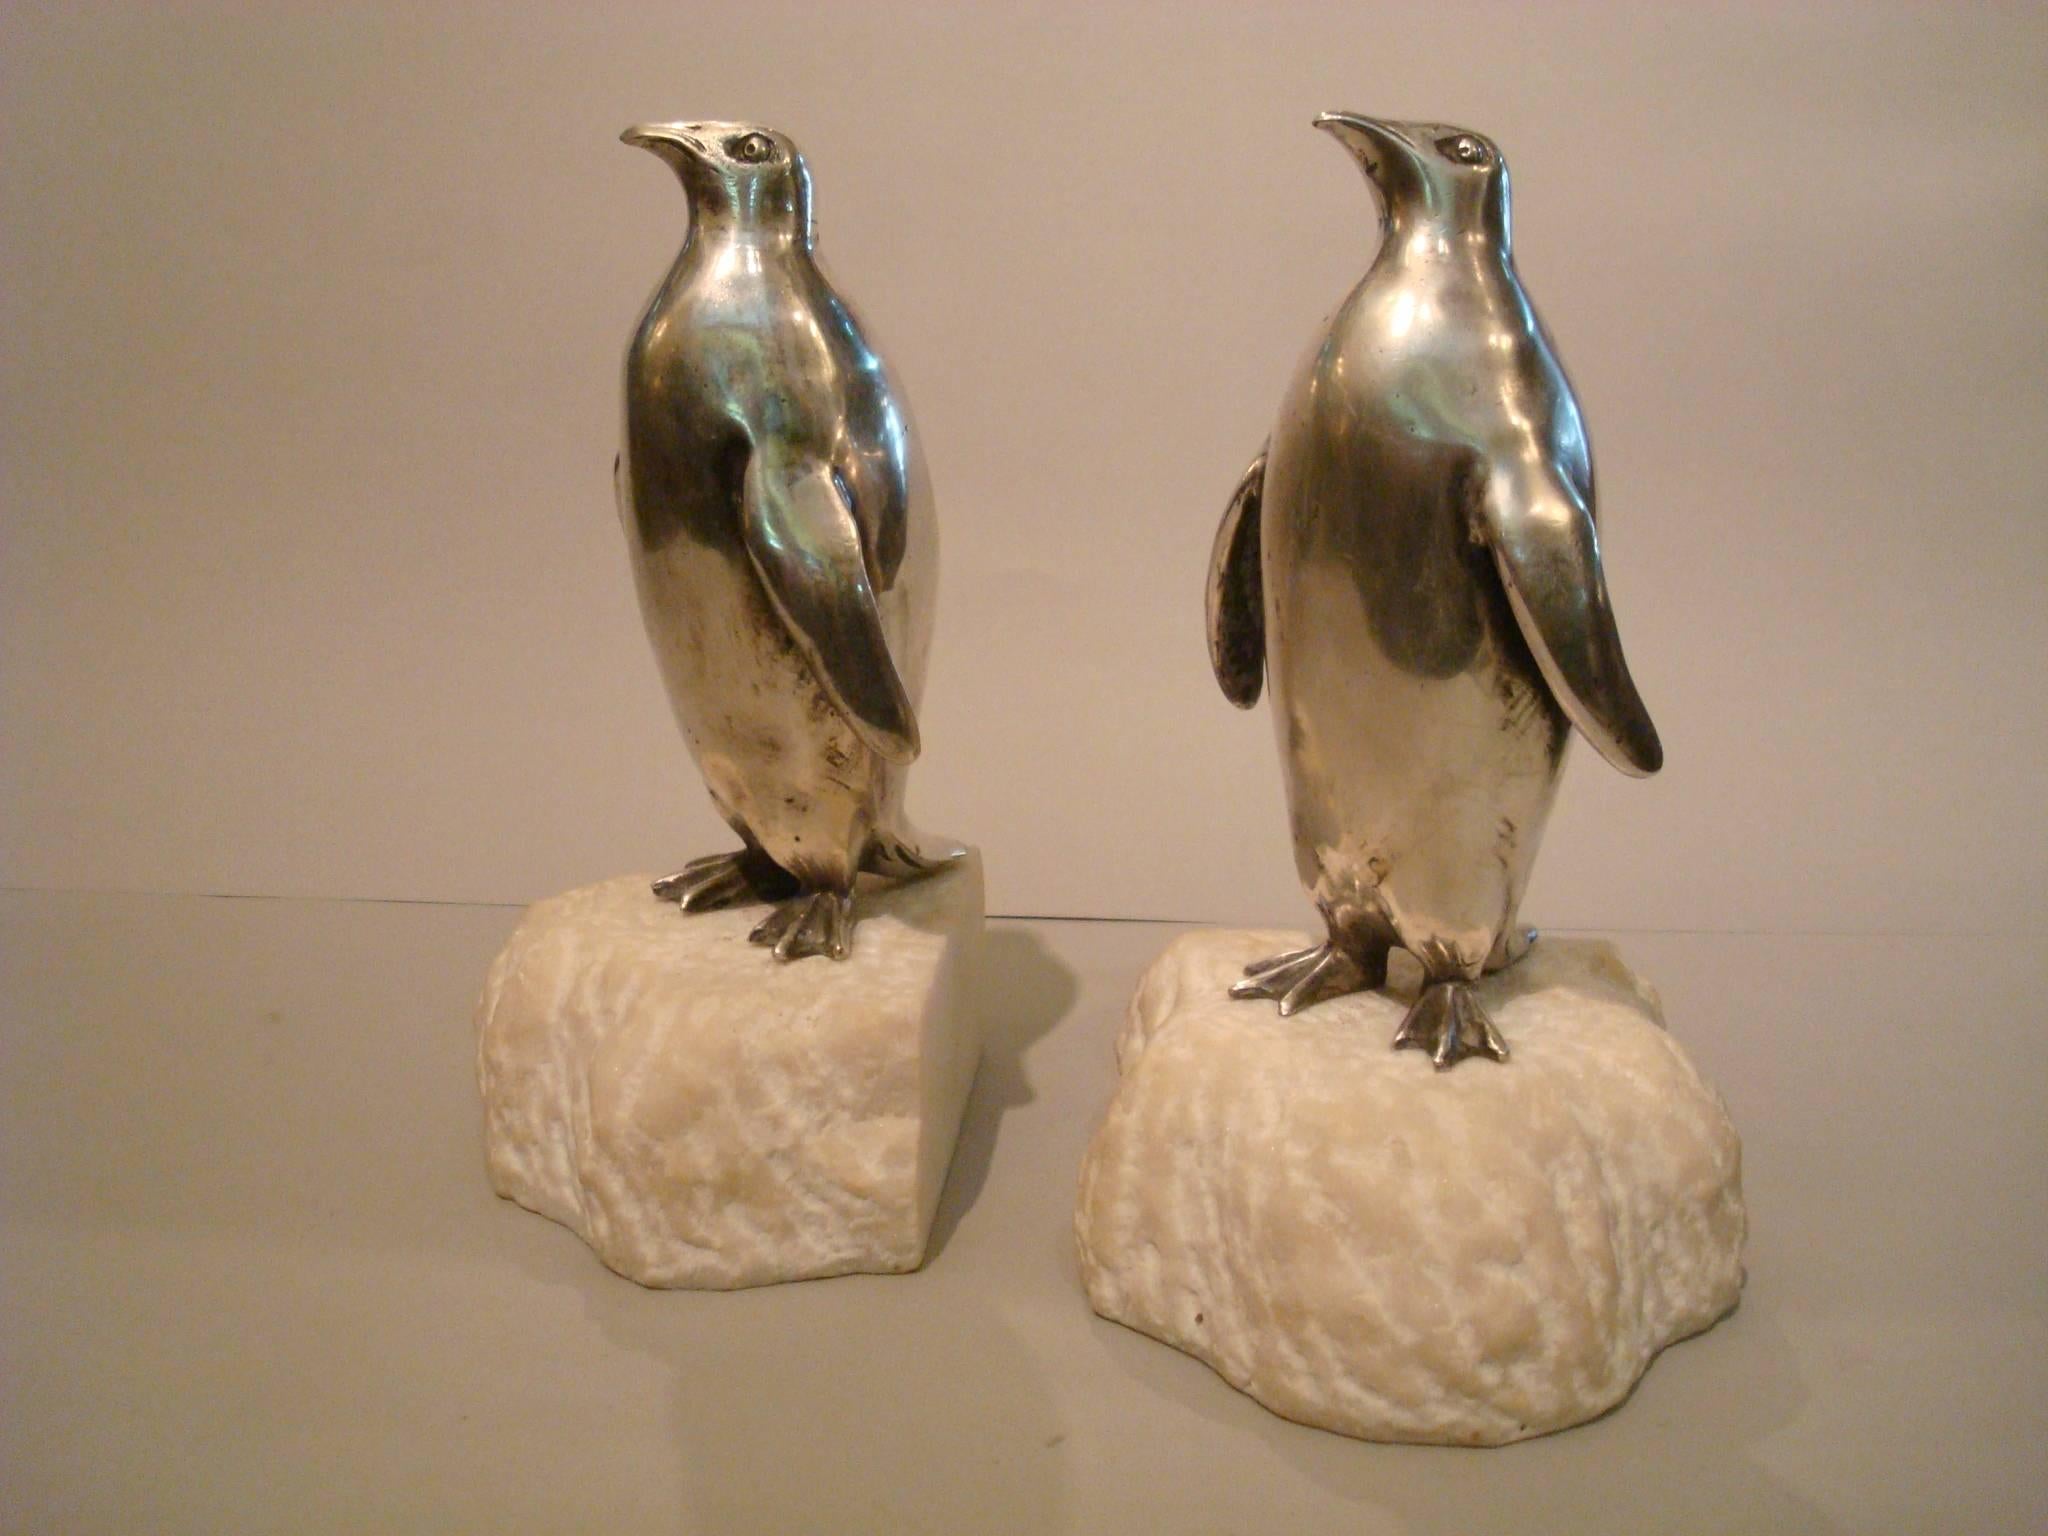 Art Deco pair of Penguin bookends, mounted over alabaster bases, they look as ice Rocks. Silver plated bronze.
Very nice Art Deco birds.